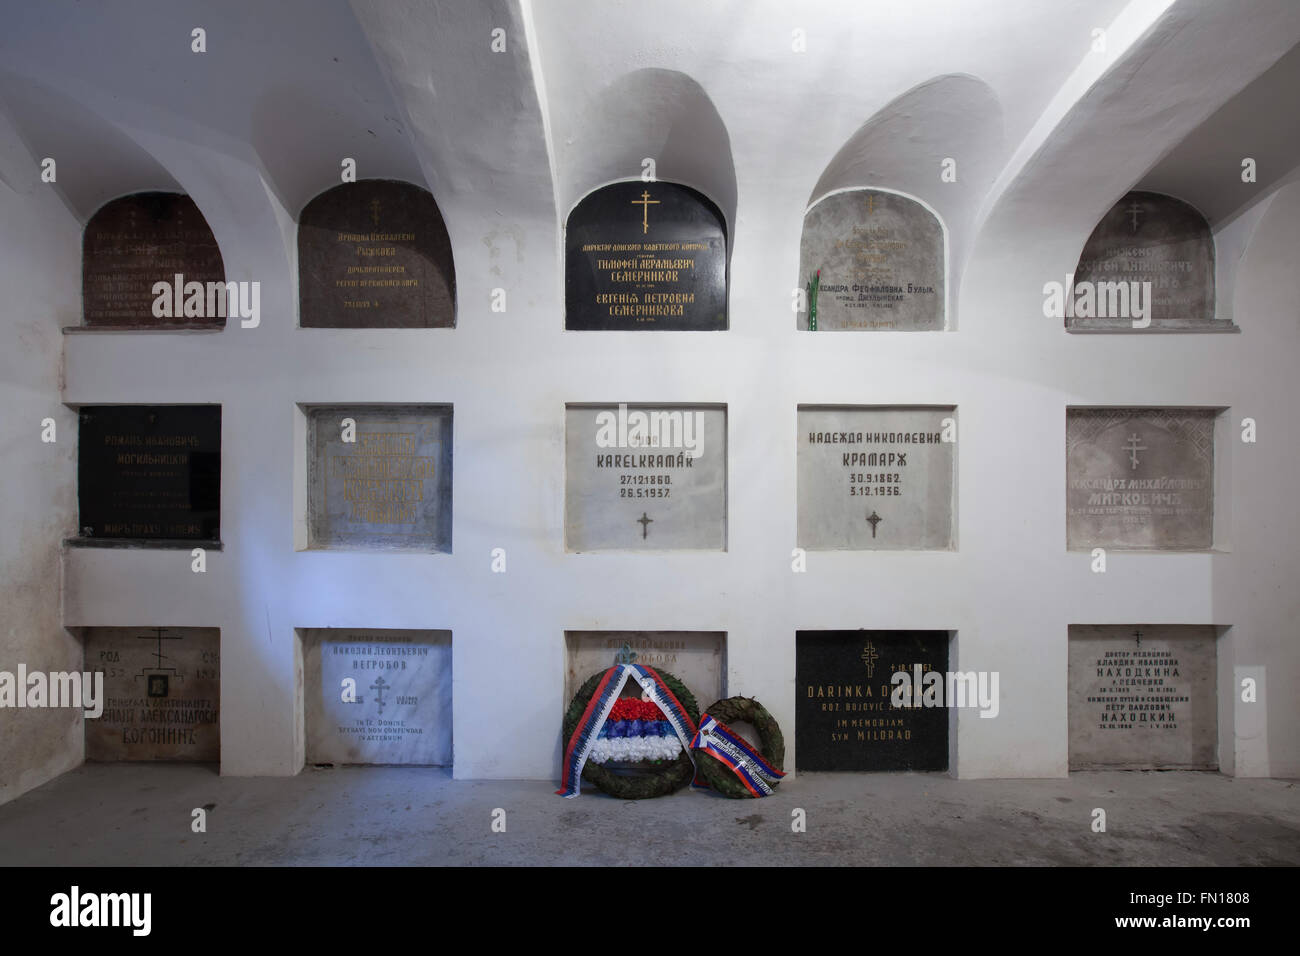 Graves of the most notable persons of the Russian emigration in Czechoslovakia in the underground crypt of the Dormition Church at the Olsany Cemetery in Prague, Czech Republic. Graves of the first Prime Minister of Czechoslovakia Karel Kramar and his Russian wife Nadezhda Kramar, nee Khludova, are seen in the centre. Graves in the upper line from left to right: Olga Ryzhkova and Ariadna Ryzhkova, a widow and a daughter of Russian priest Nikolai Ryzhkov, Russian general Timofey Semernikov and his wife Yevgenia Semernikova, Ukrainian politician Semyon Bulyk and his wife Alexandra Bulyk, Russian Stock Photo